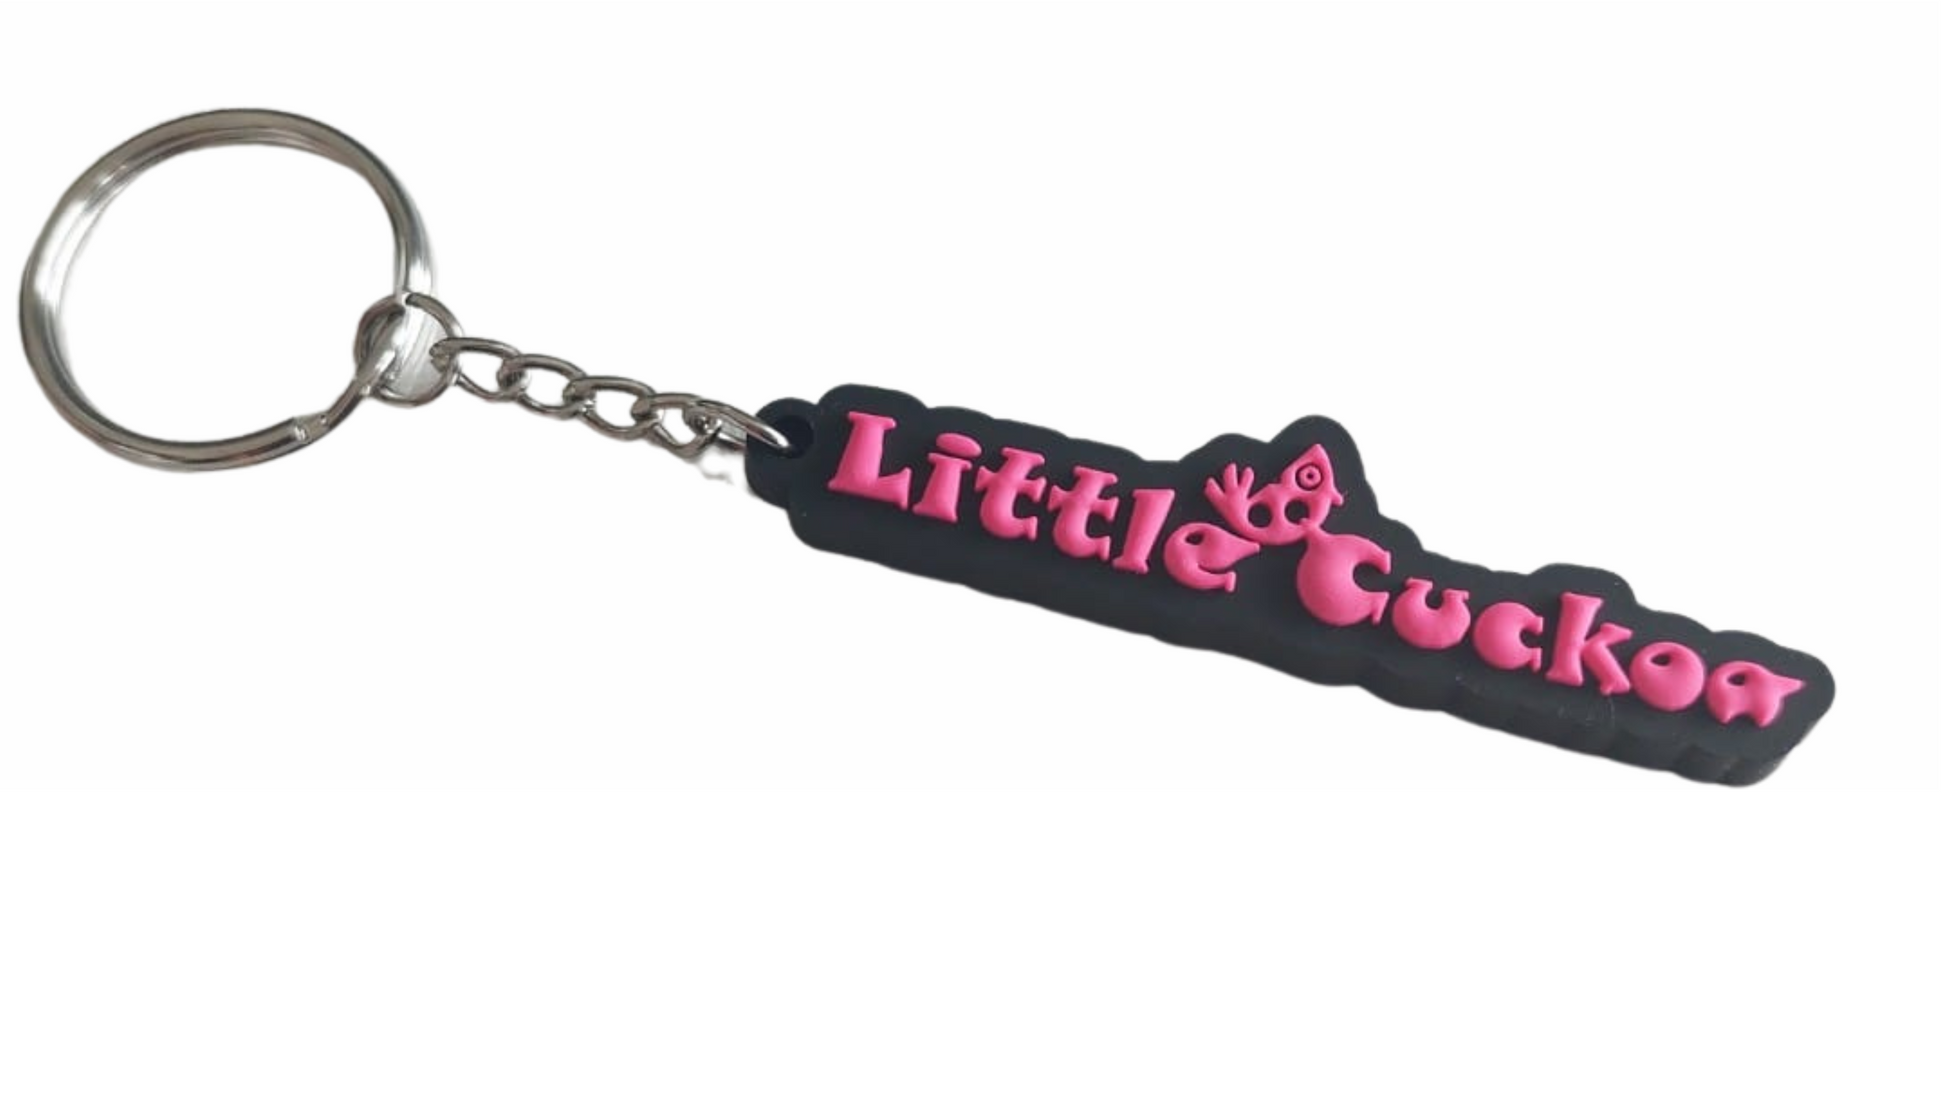 LittleCuckoo Brand KeyChains | Amazing Quirky Symbol of Ours ! - LittleCuckoo